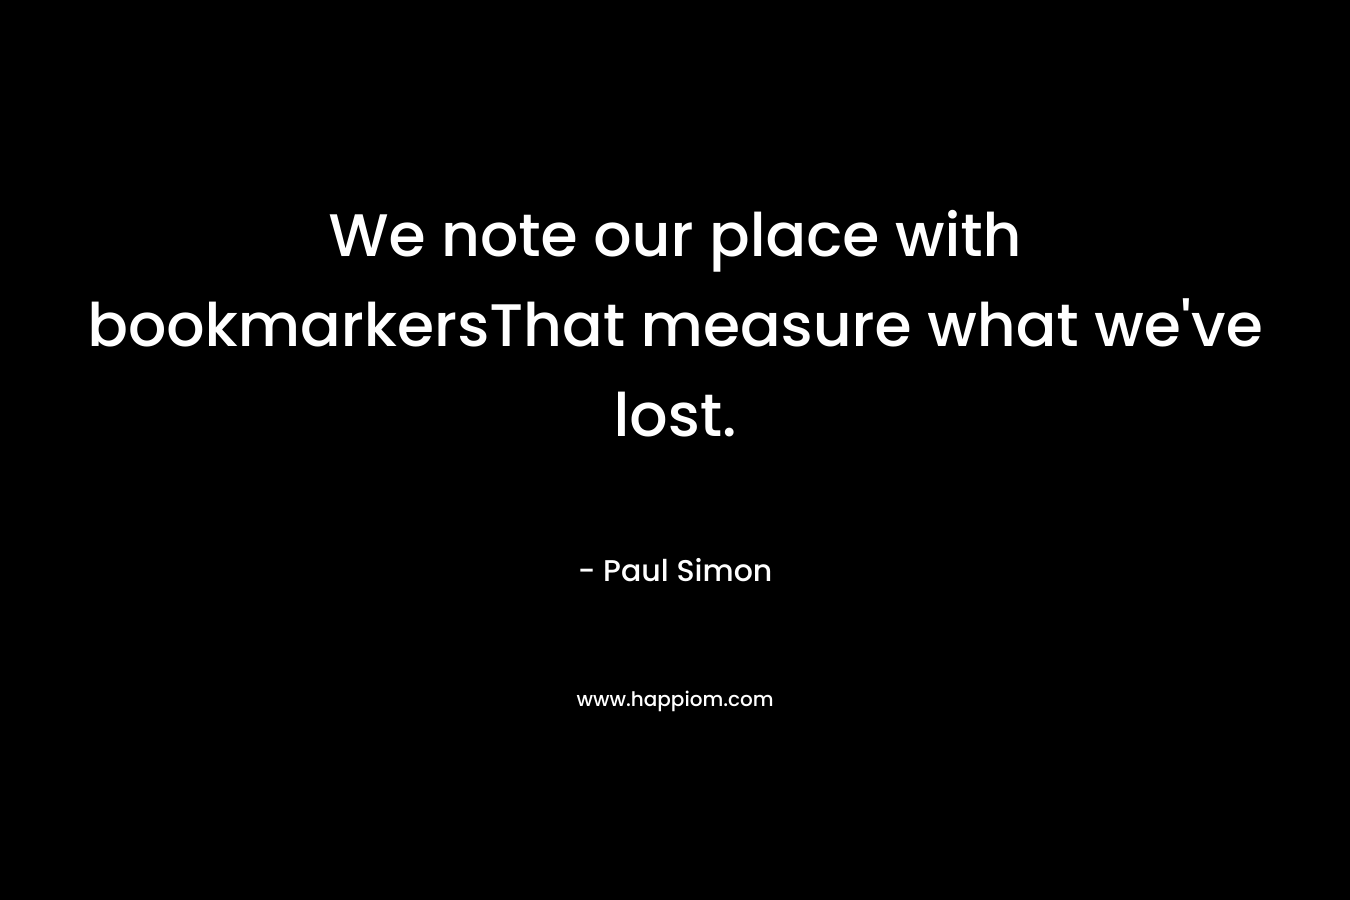 We note our place with bookmarkersThat measure what we've lost.